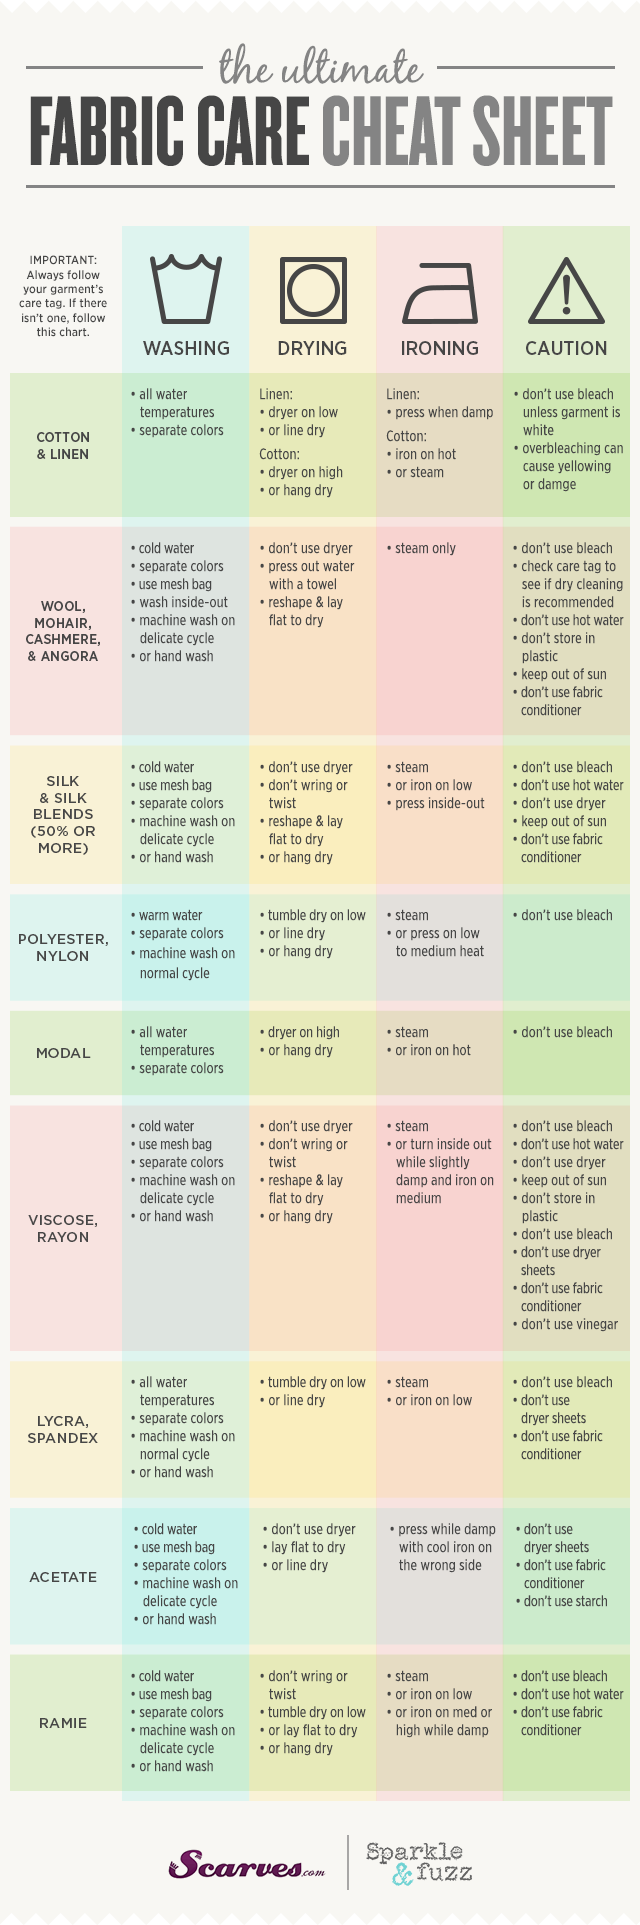 Fabric Cheat Sheet by Scarves.com